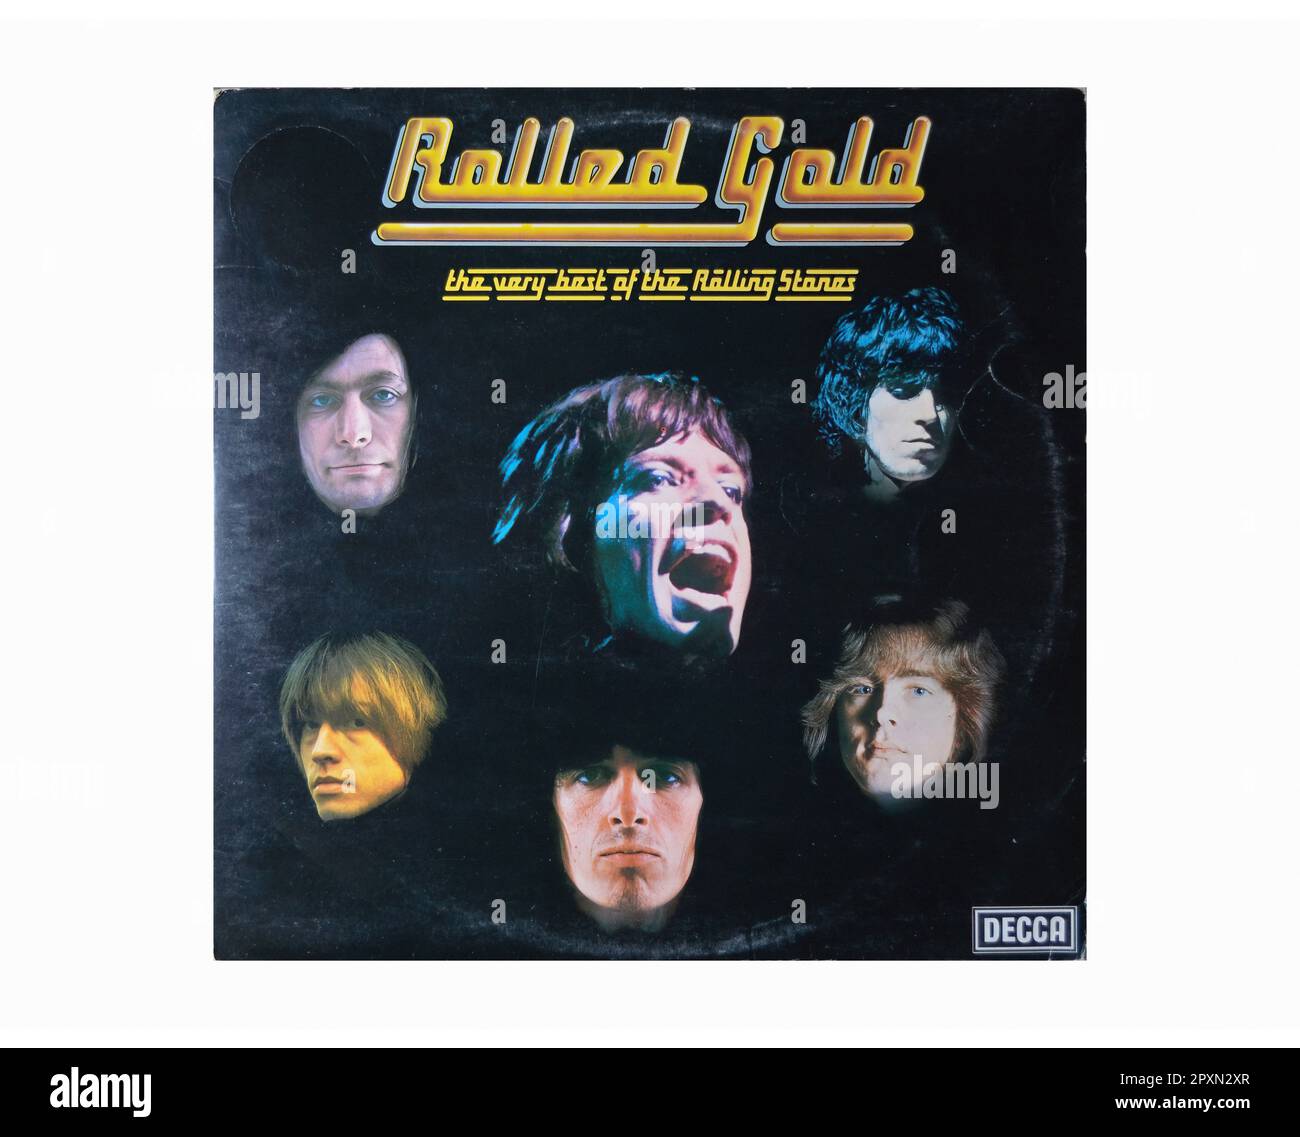 The Rolling Stones - Rolled Gold - Vintage L.P Music Vinyl Record Stock ...